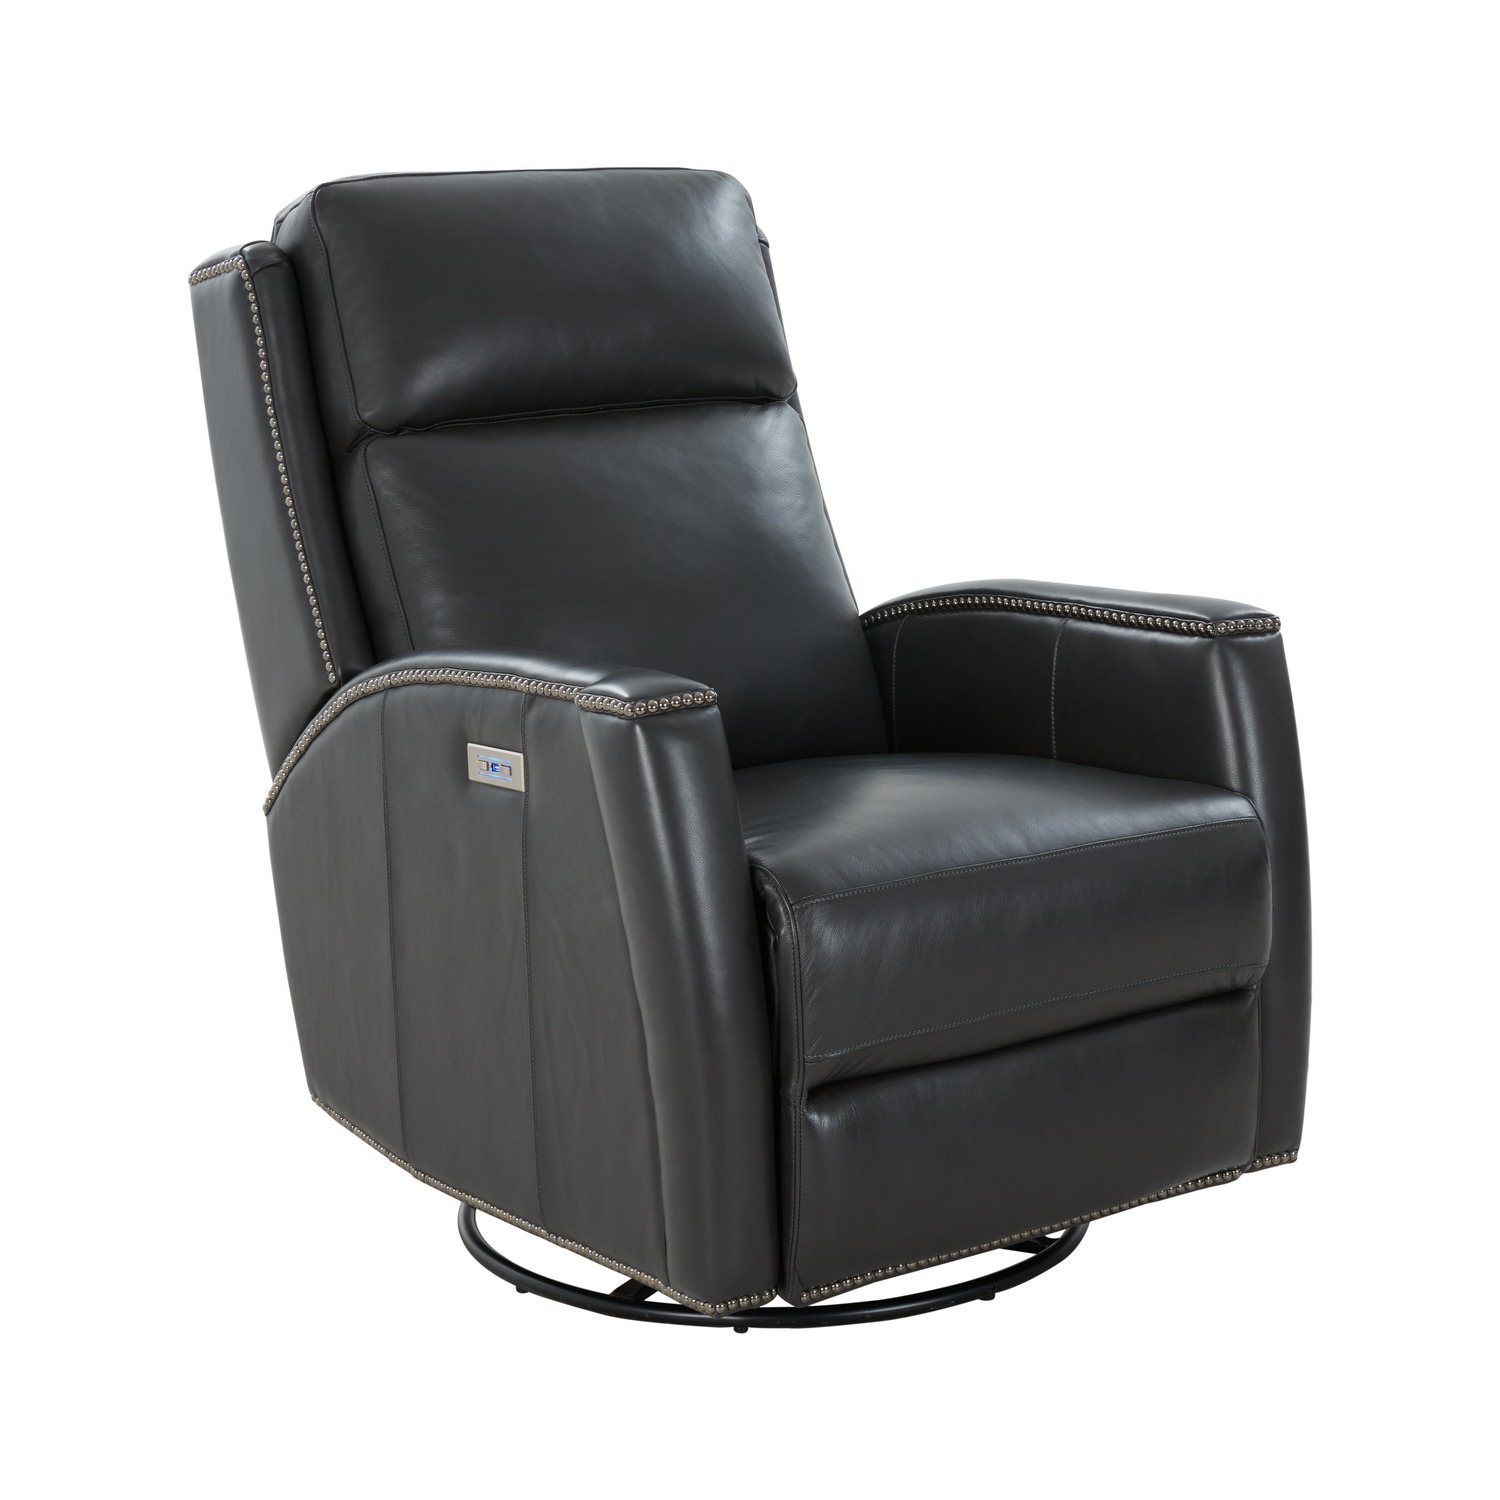 Barcalounger Brandt Power Swivel Glider Recliner Chair with Power Head Rest - Shoreham Gray/All Leather